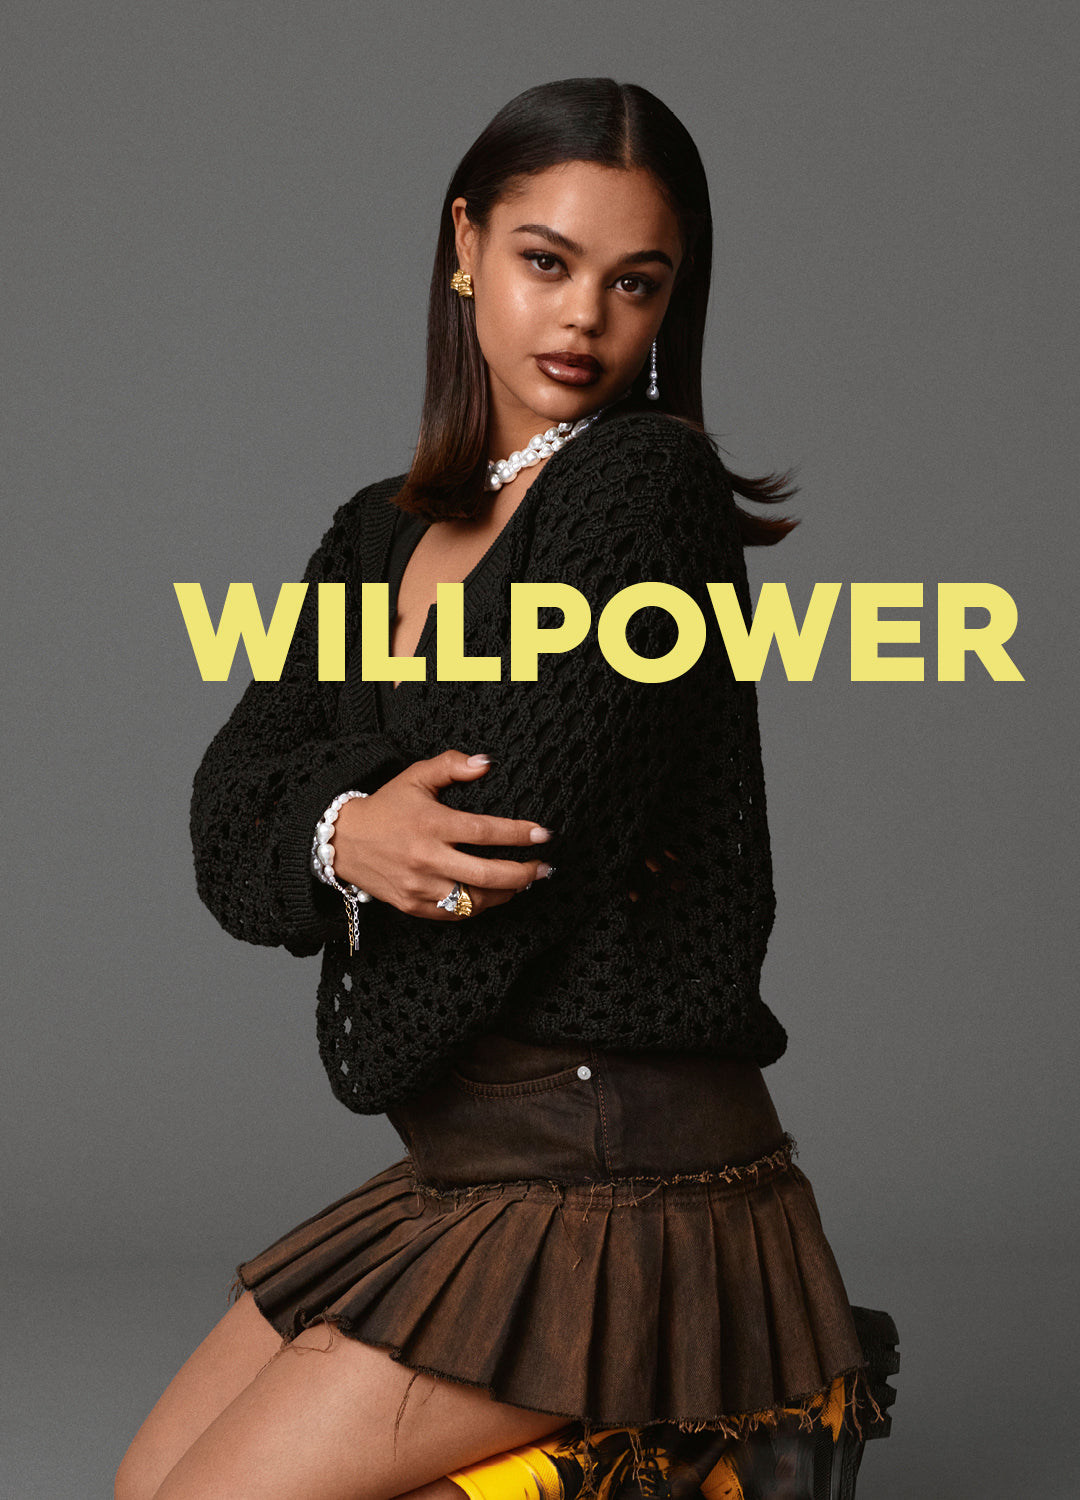 EXPLORE THE WILLPOWER COLLECTION